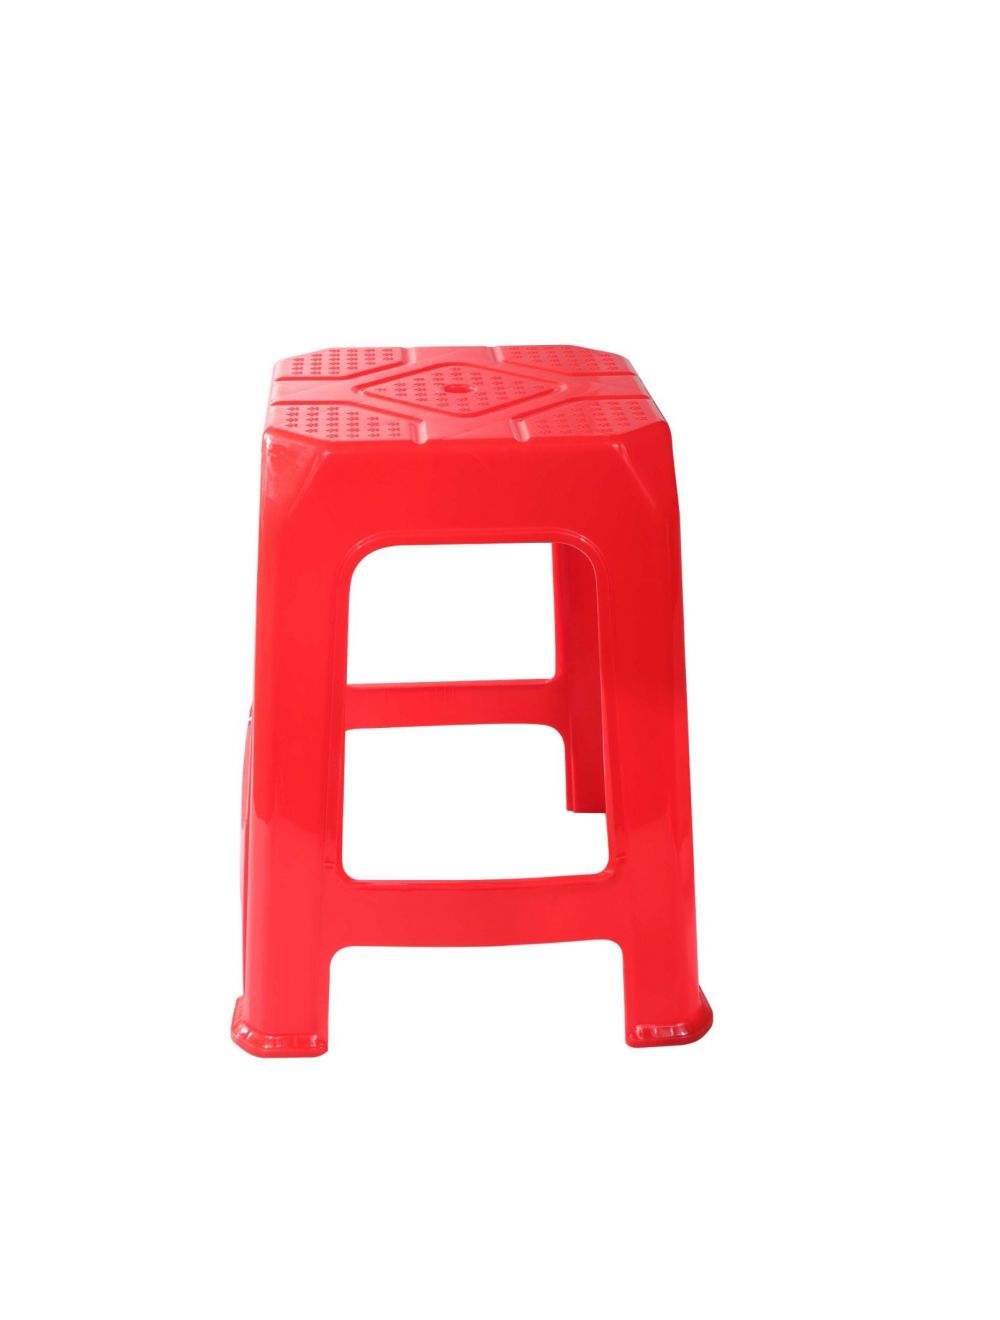 Delcasa Plastic Stool | Color Red | Home Accessories in Bahrain | Halabh